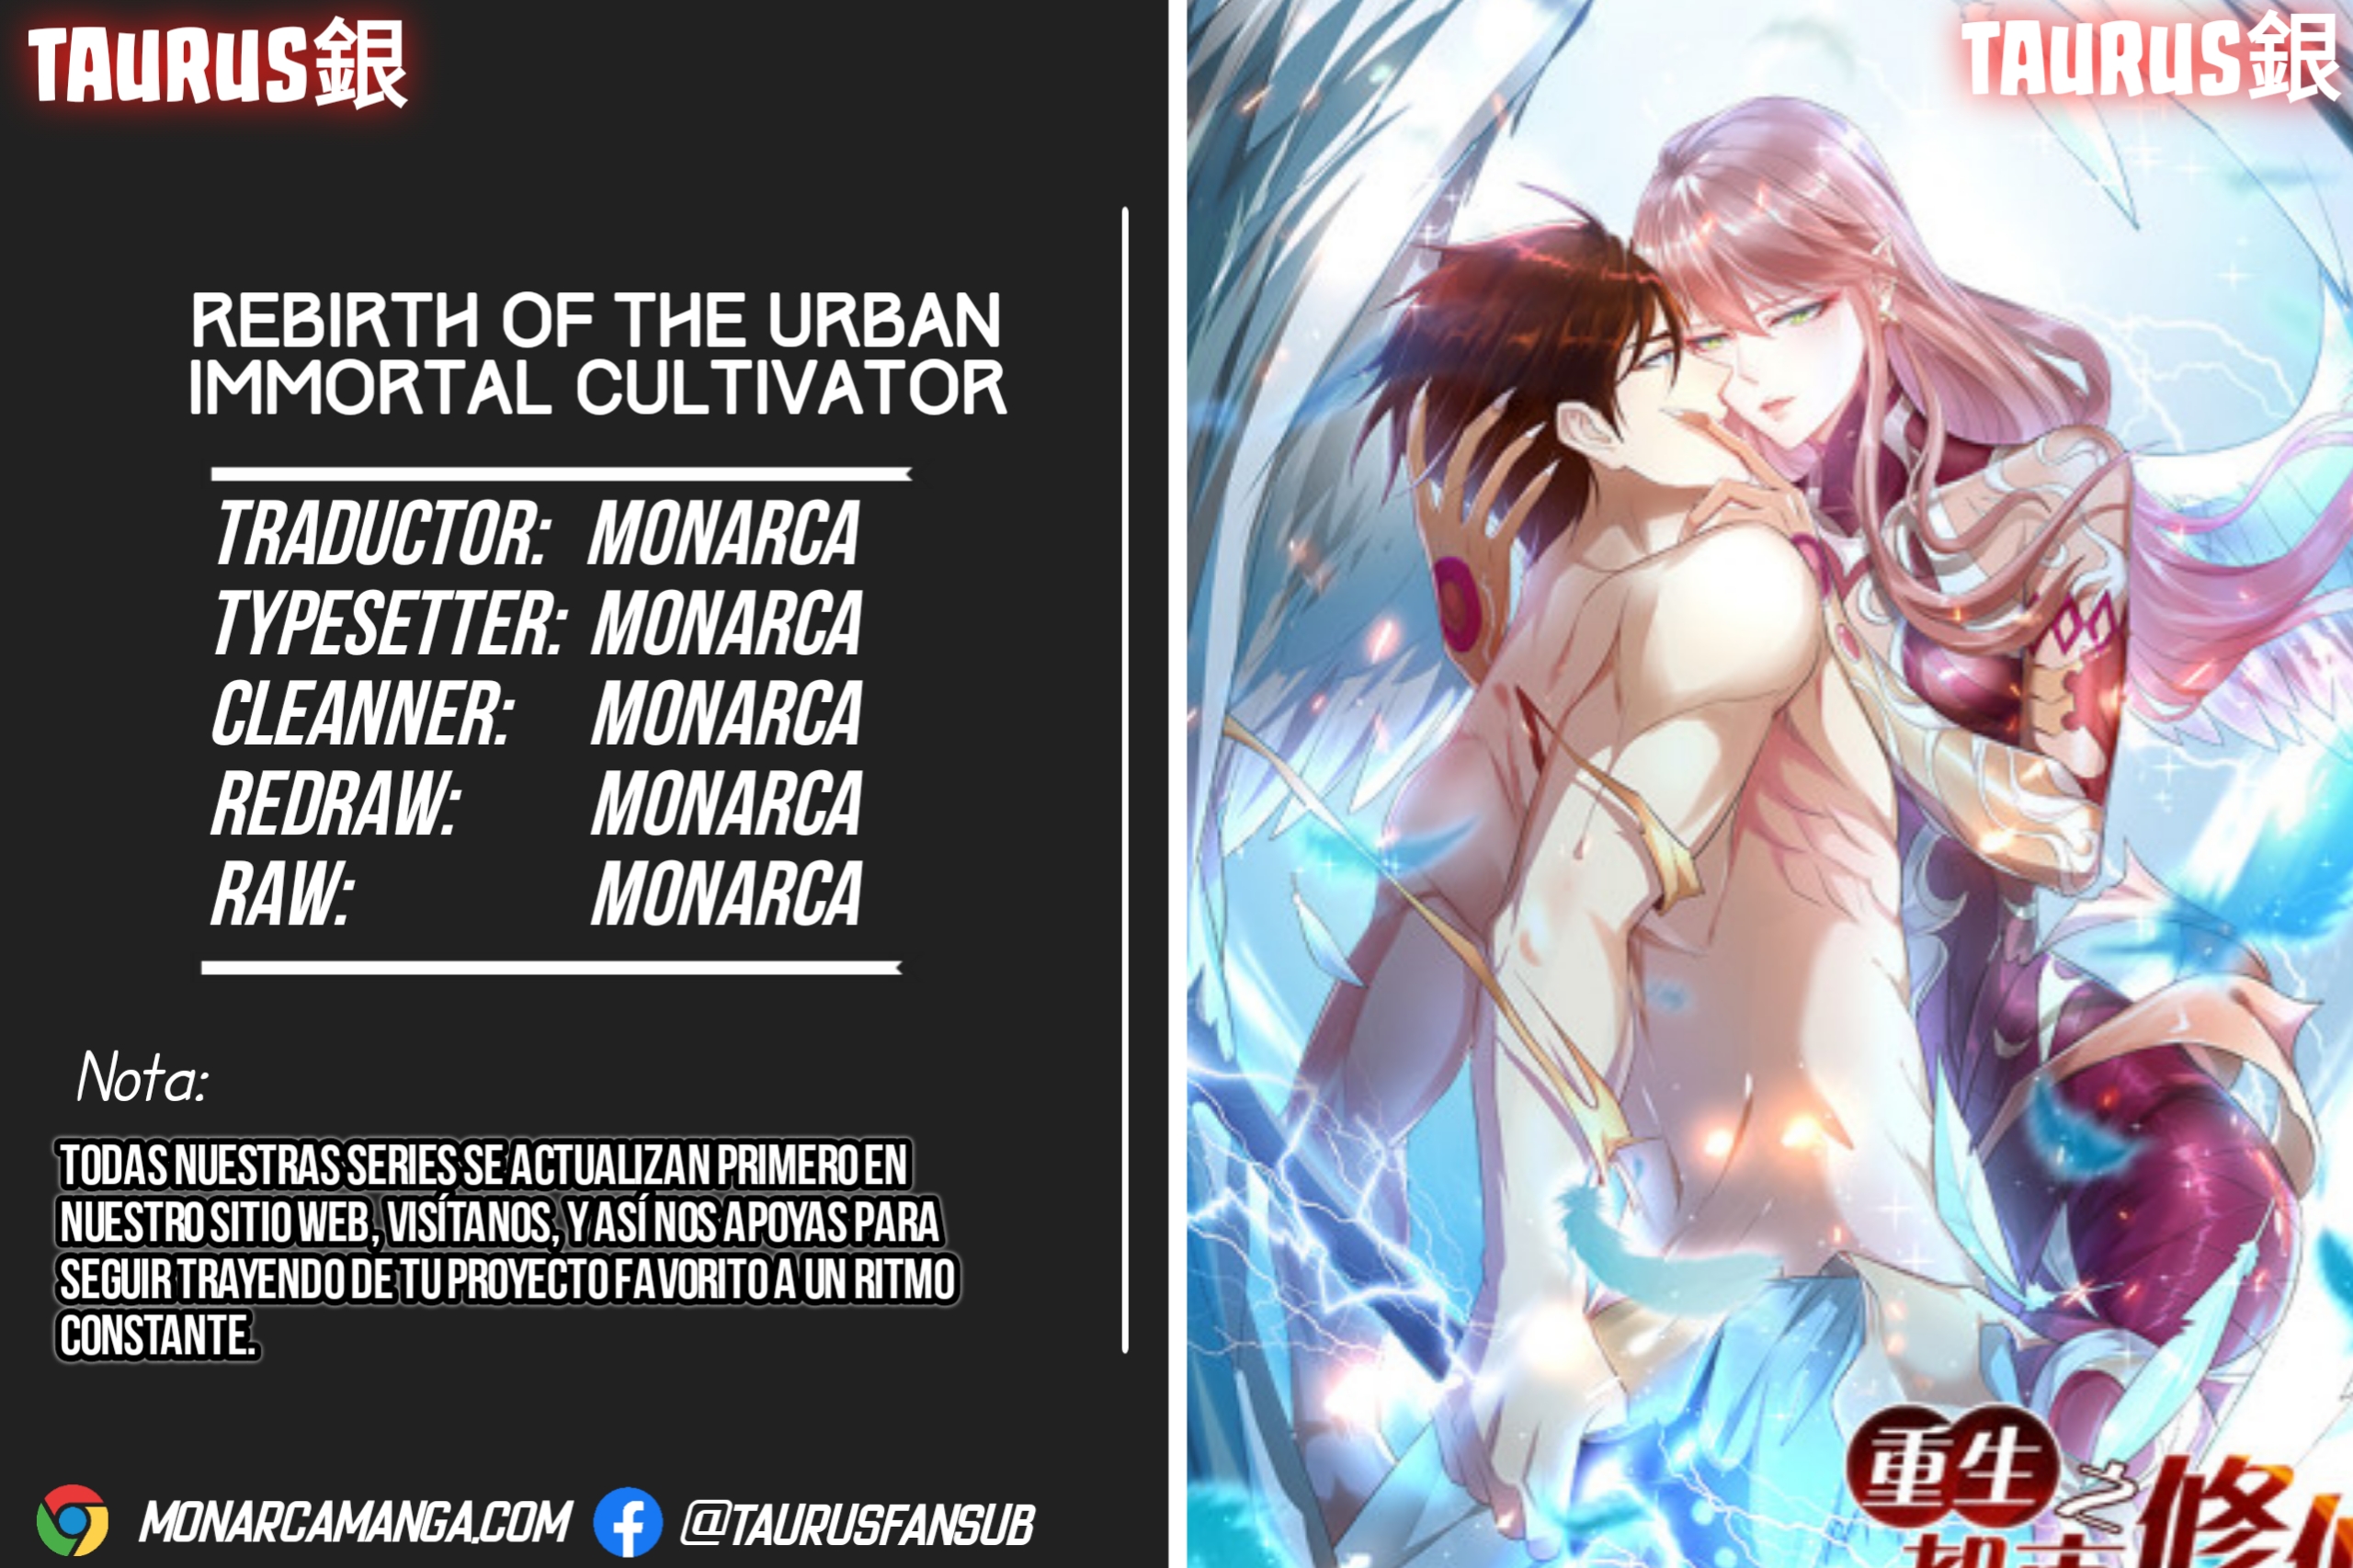 Manga Rebirth Of The Urban Immortal Cultivator Chapter 731 image number 5